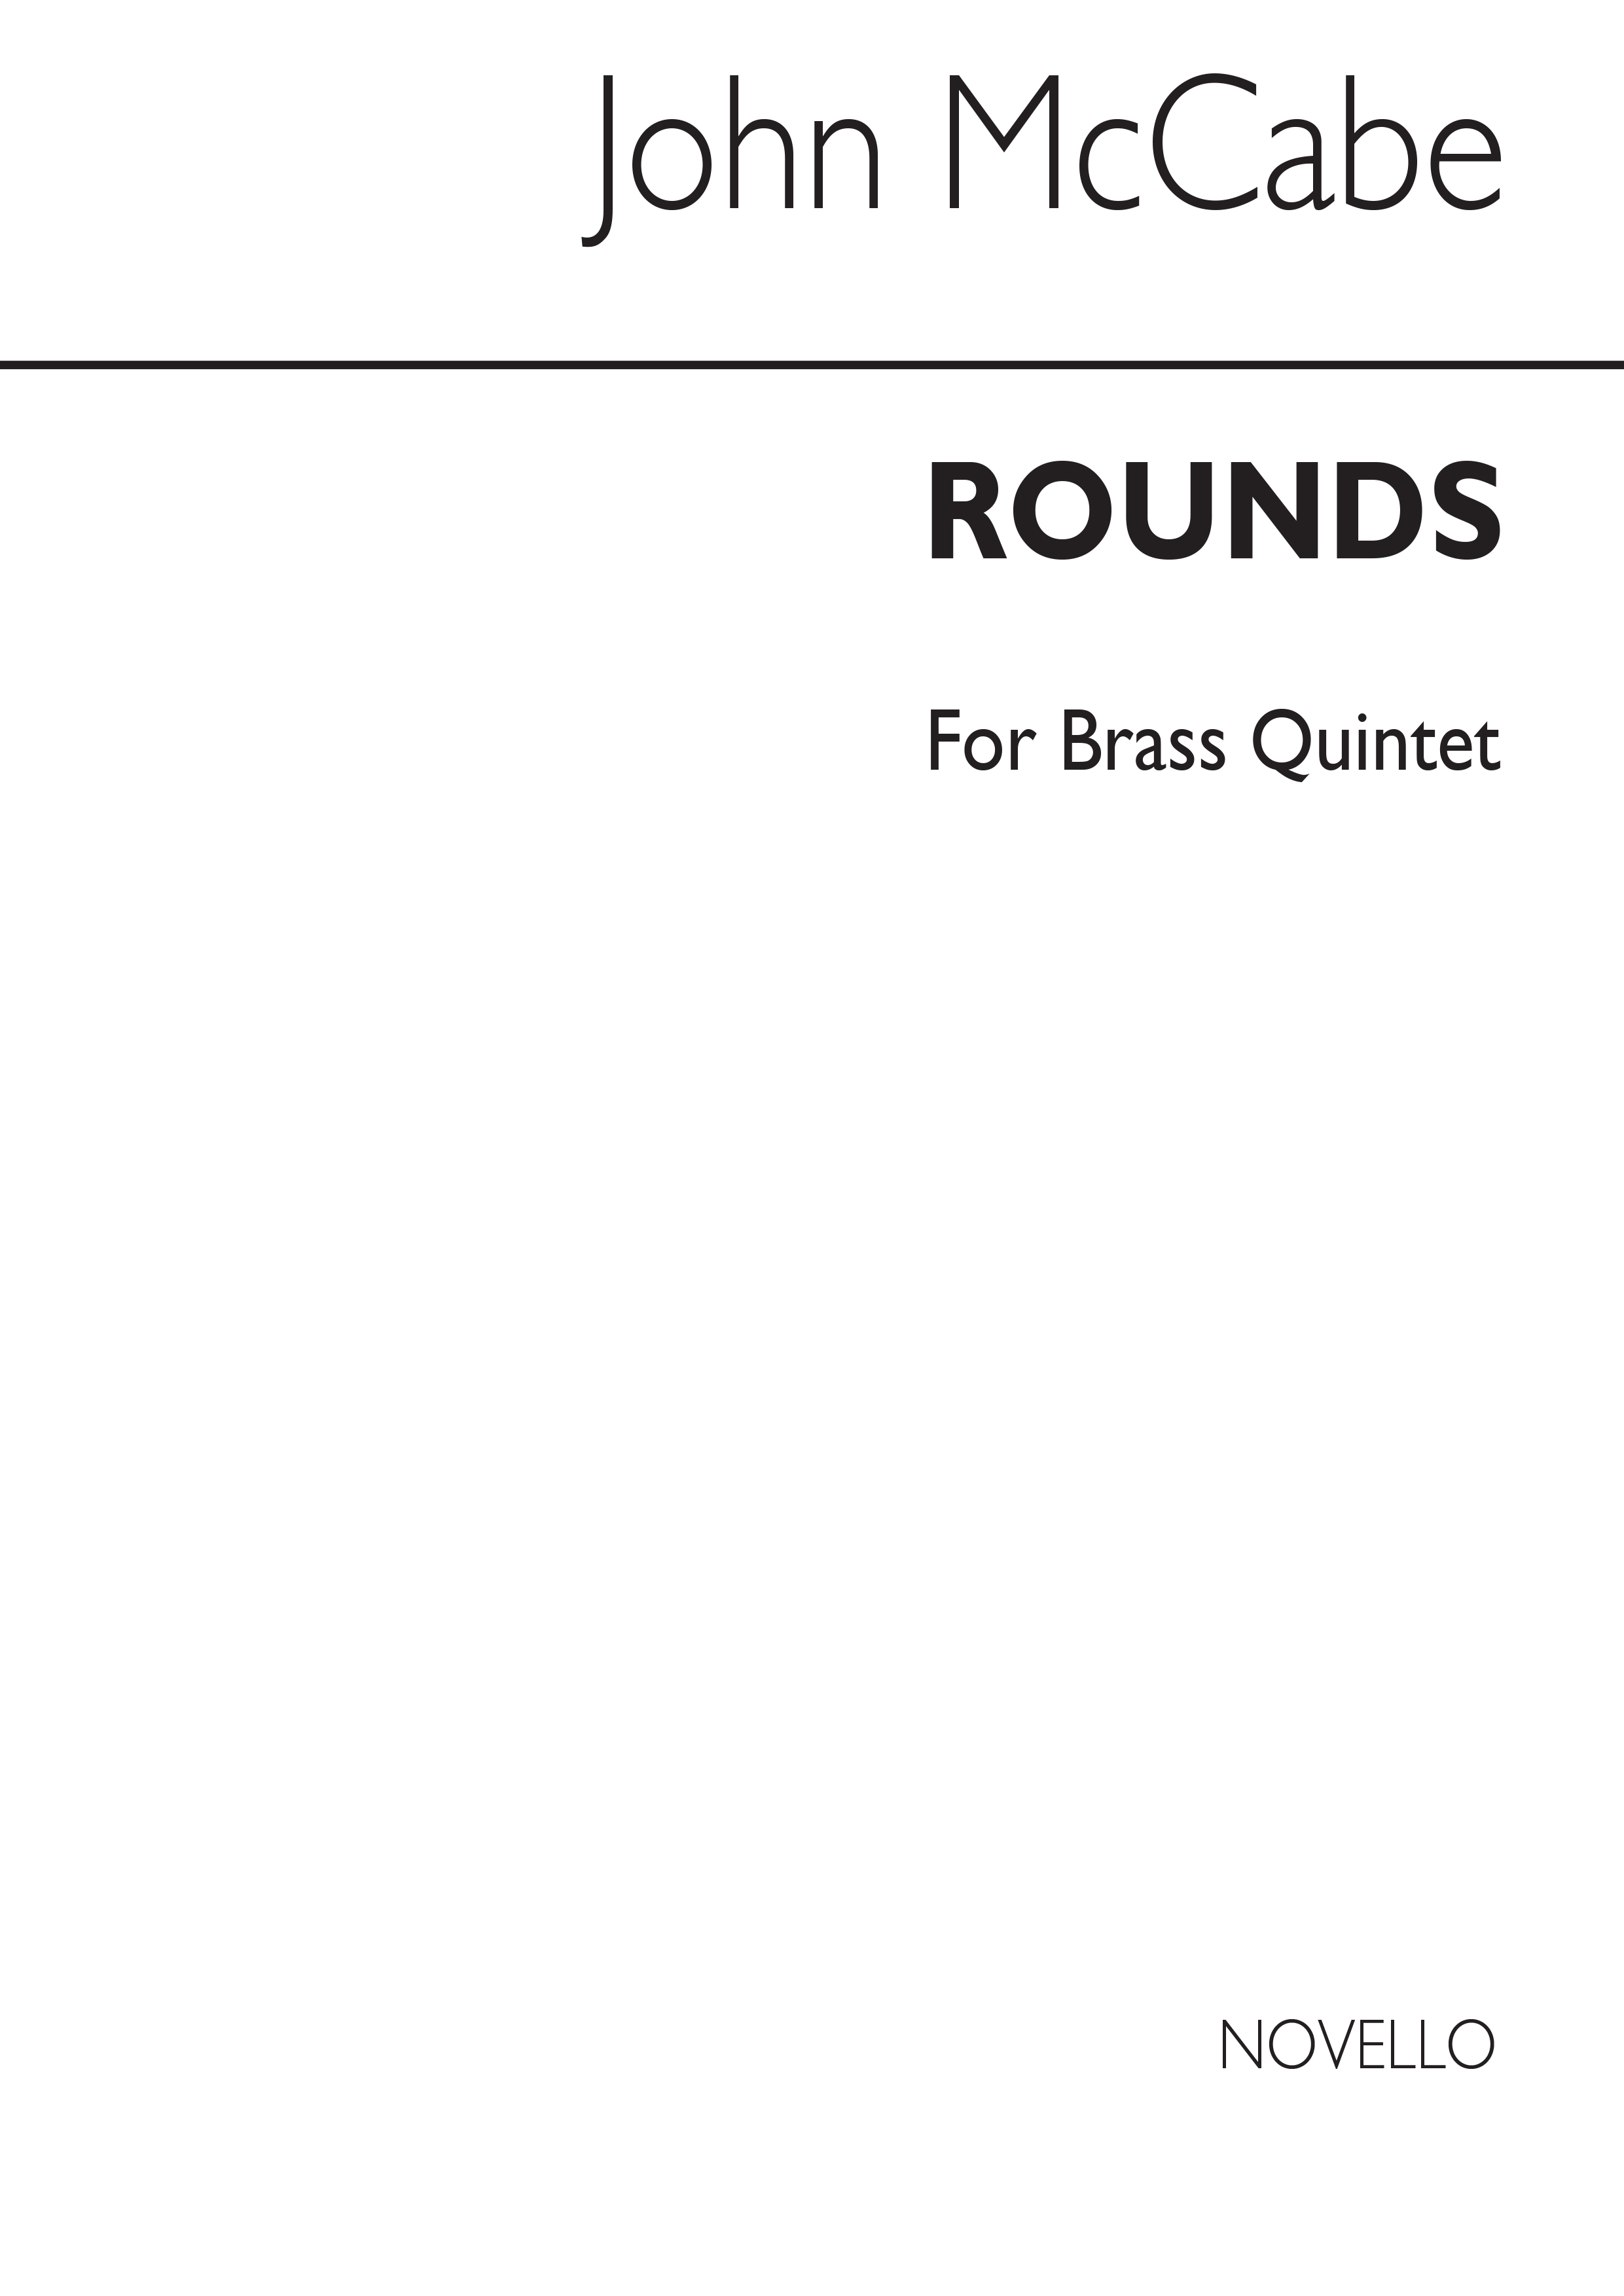 McCabe: Rounds For Brass Quintet (Score)